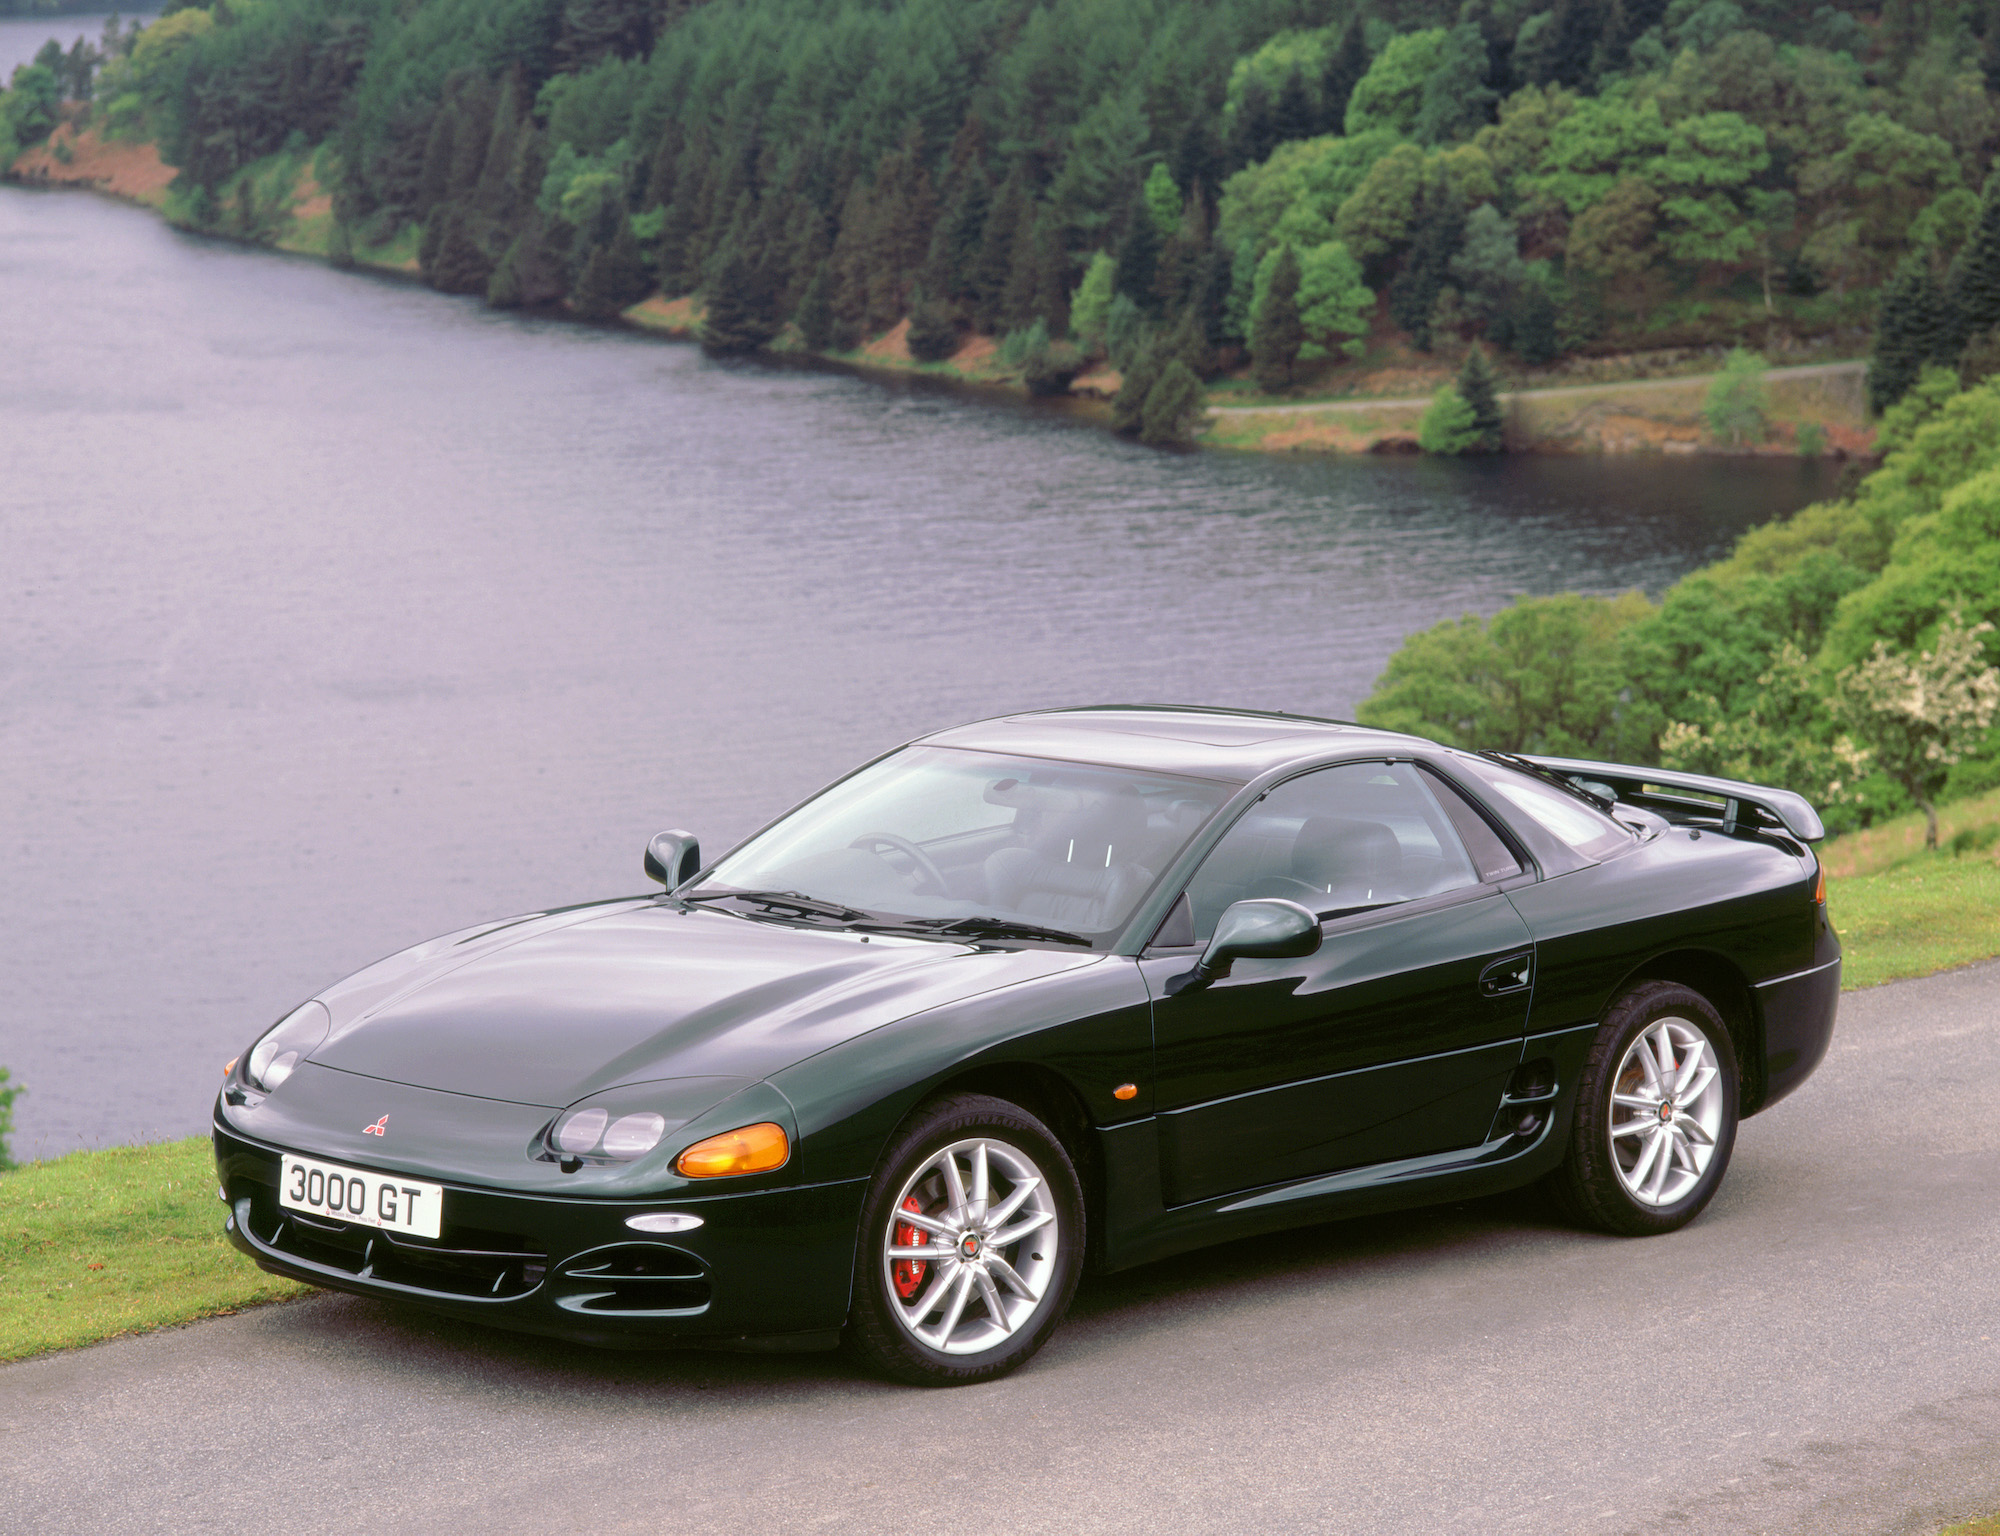 A black 1999 Mitsubishi 3000GT parked by a Welsh reservoir in 2000